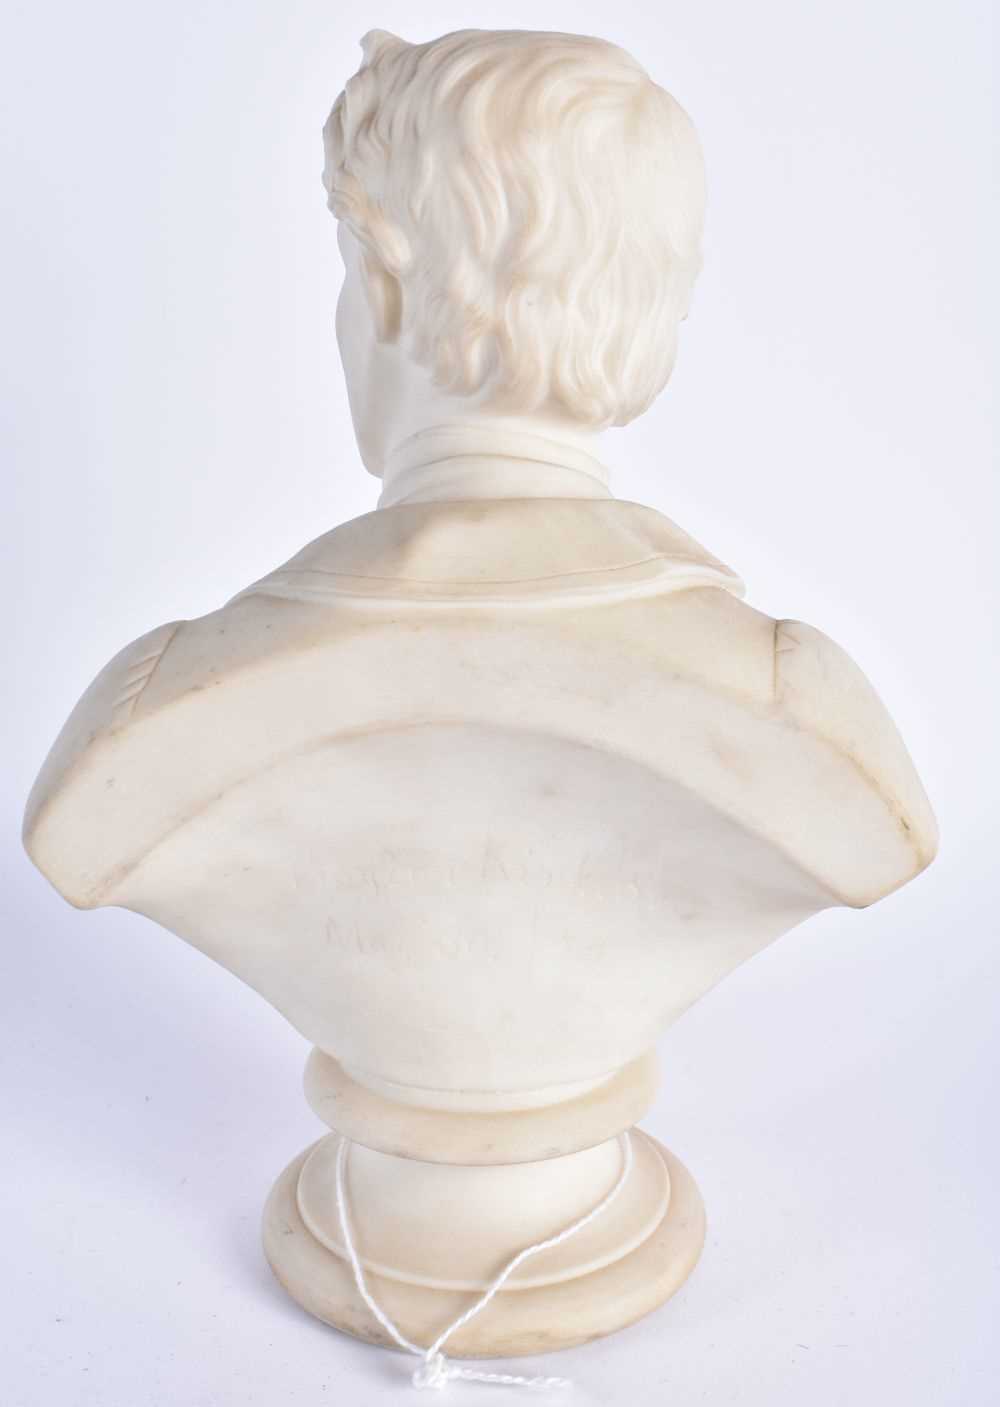 A 19TH CENTURY KERR & BINNS WORCESTER PARIAN WARE BUST OF A MALE. 22 cm x 12 cm. - Image 3 of 7